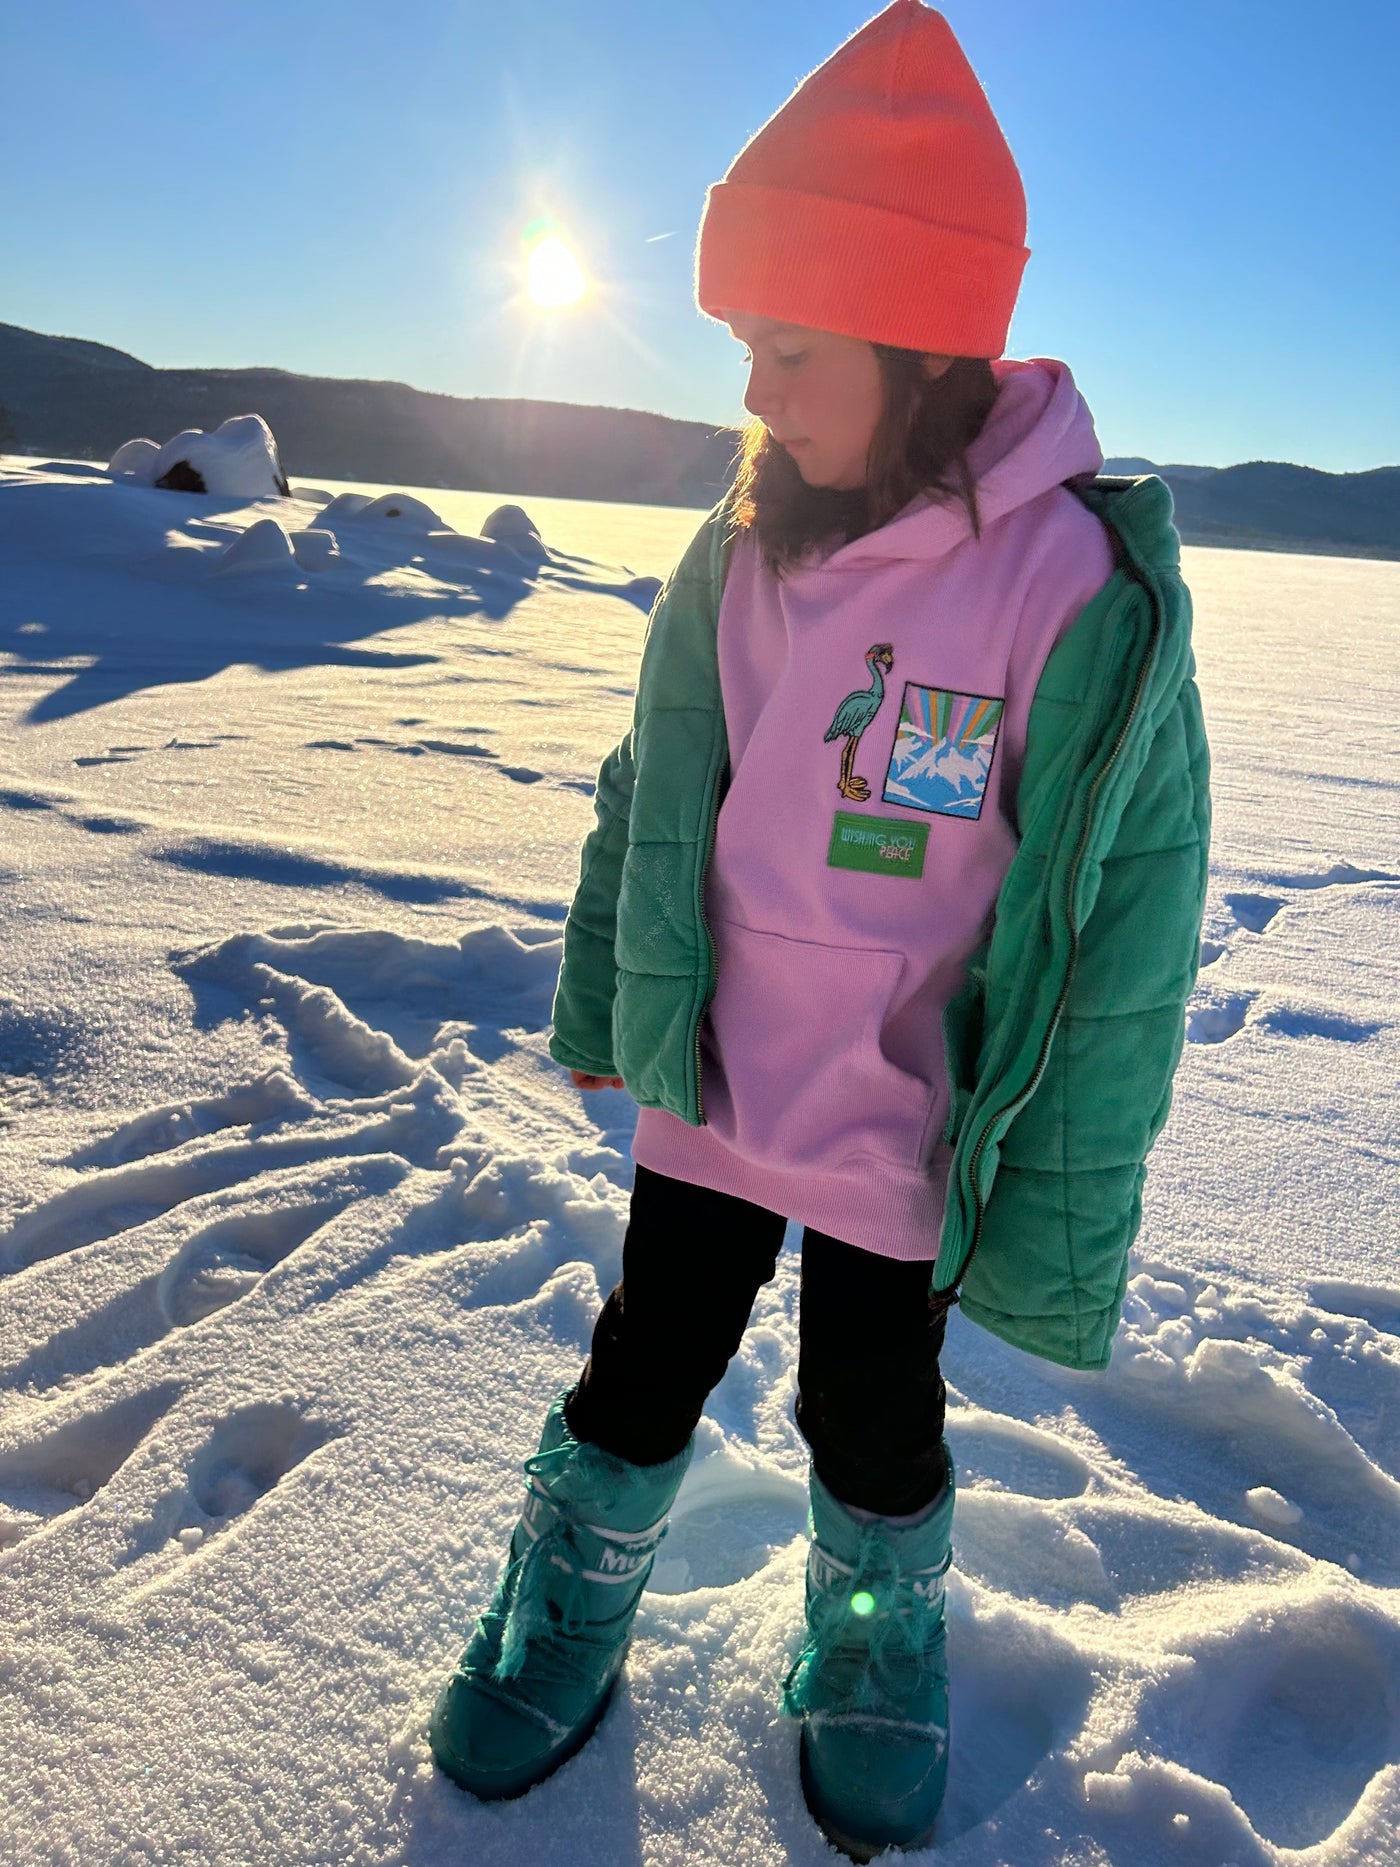 SAMPLE - BIRDZ From the mountains to the waves Hoodie |Lilac| Kidz